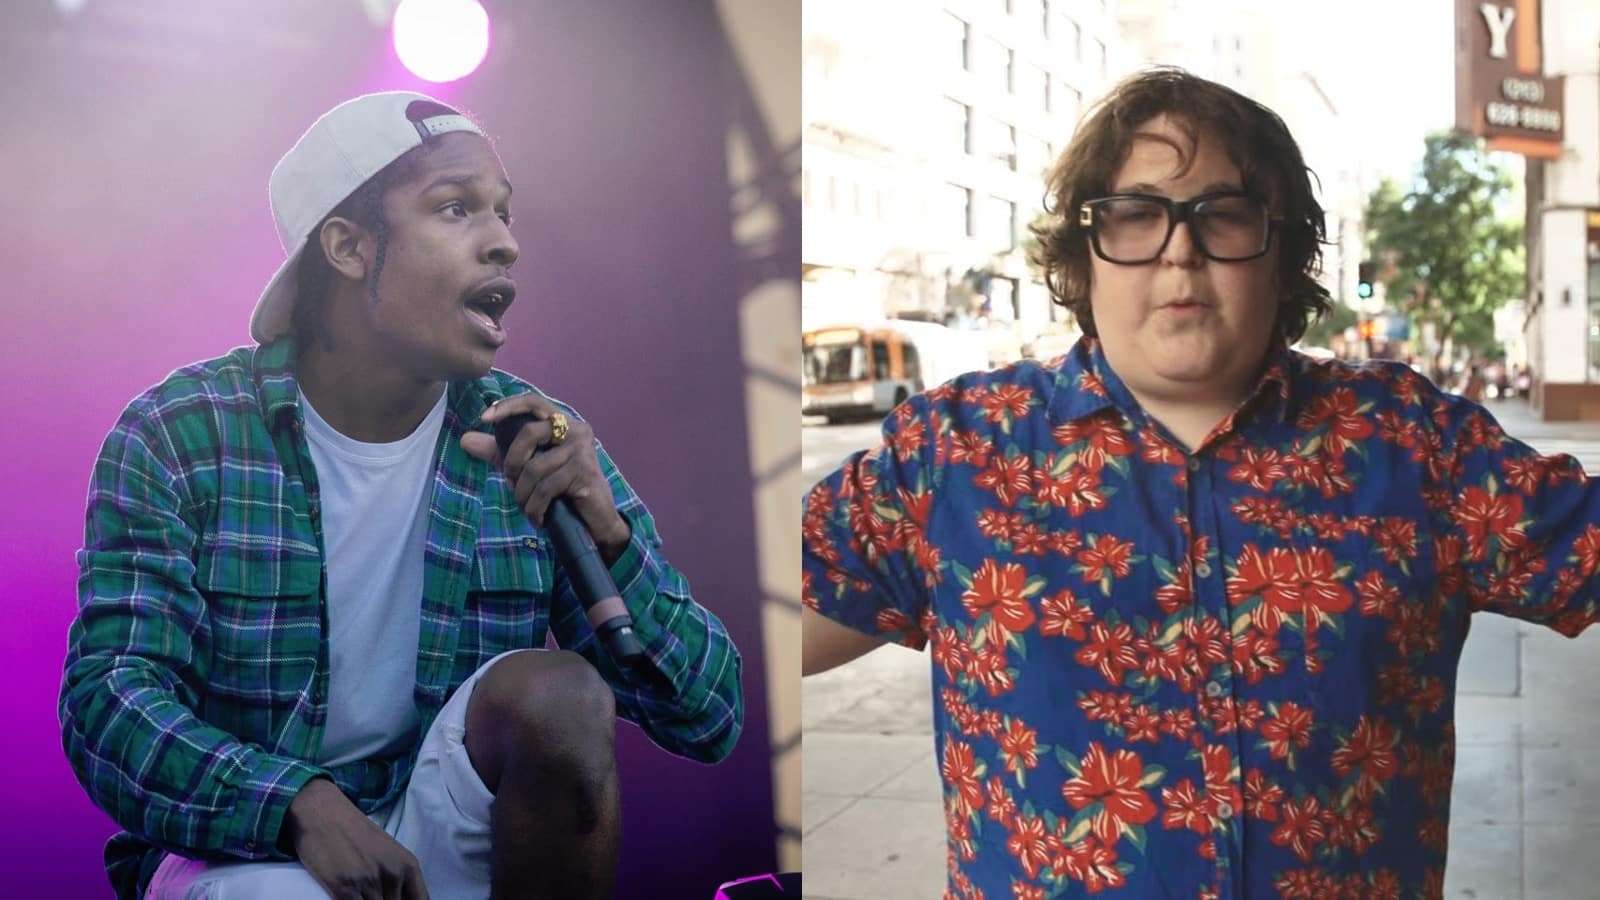 ASAP Rocky and Andy Milonakis